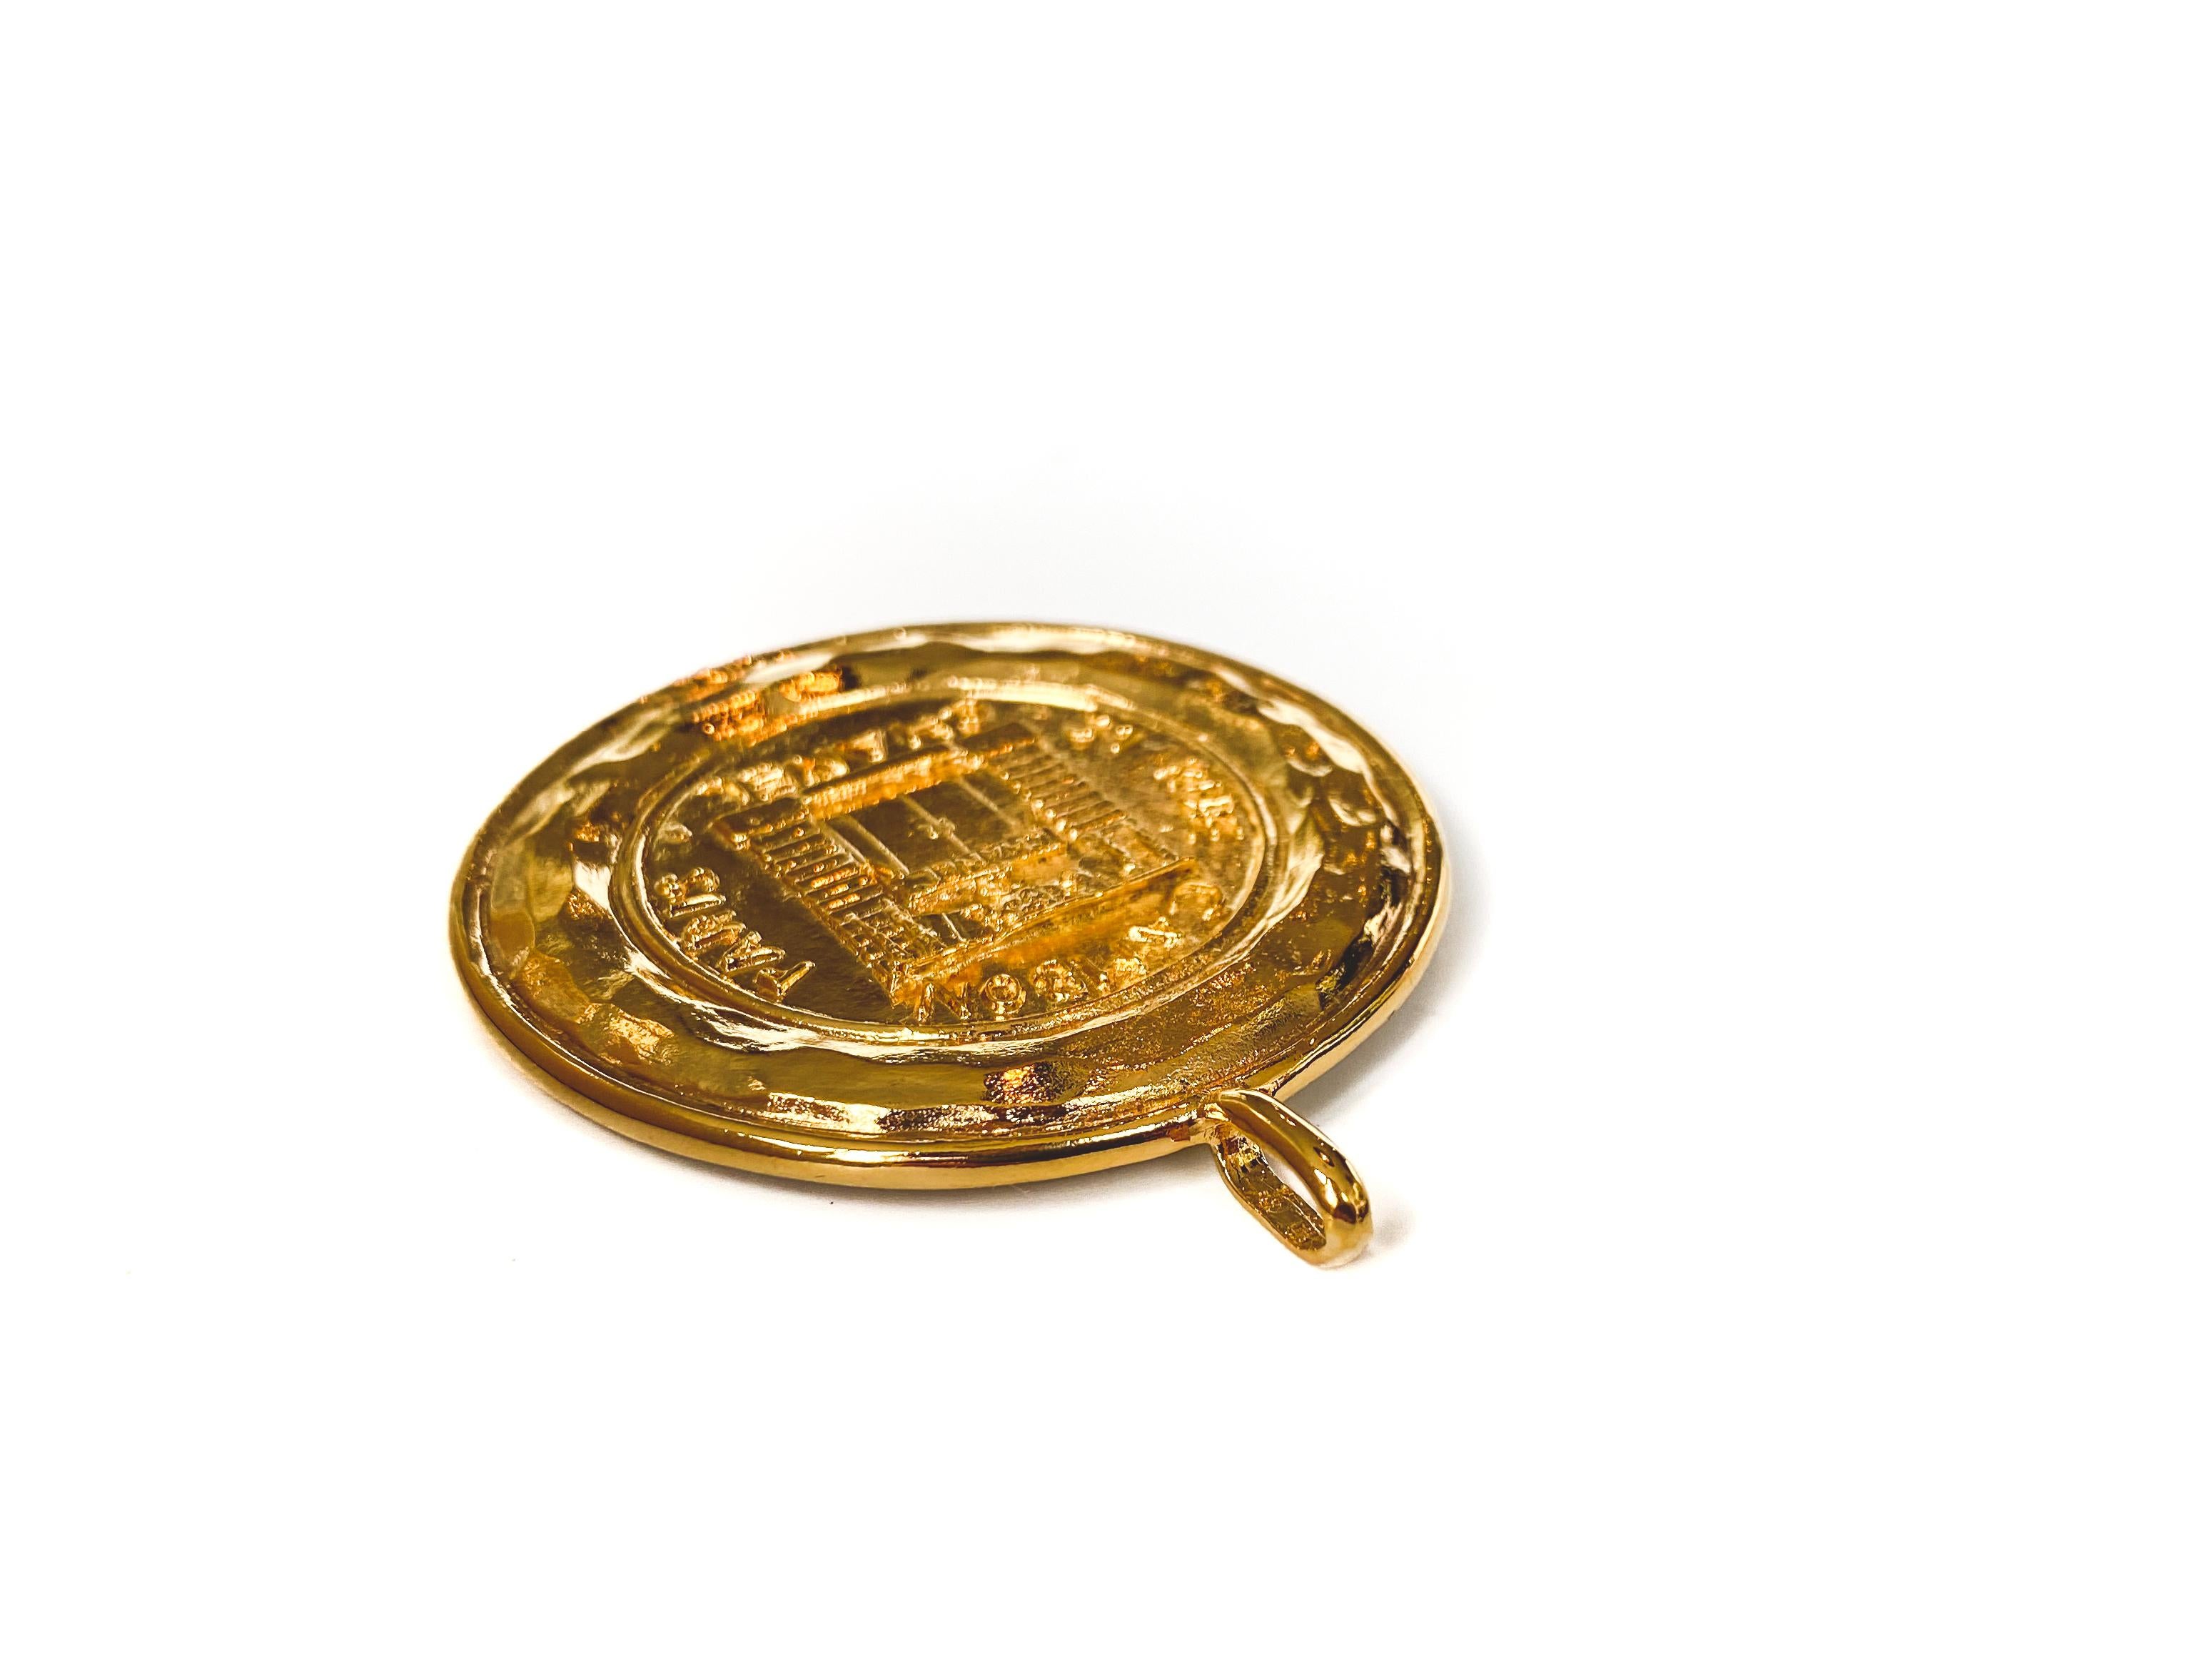 Chanel Rue Cambon Vintage 1980s Pendant

Amazing statement pendant from the 1980s chanel archive. 

This vintage gold-plated design is embossed with 